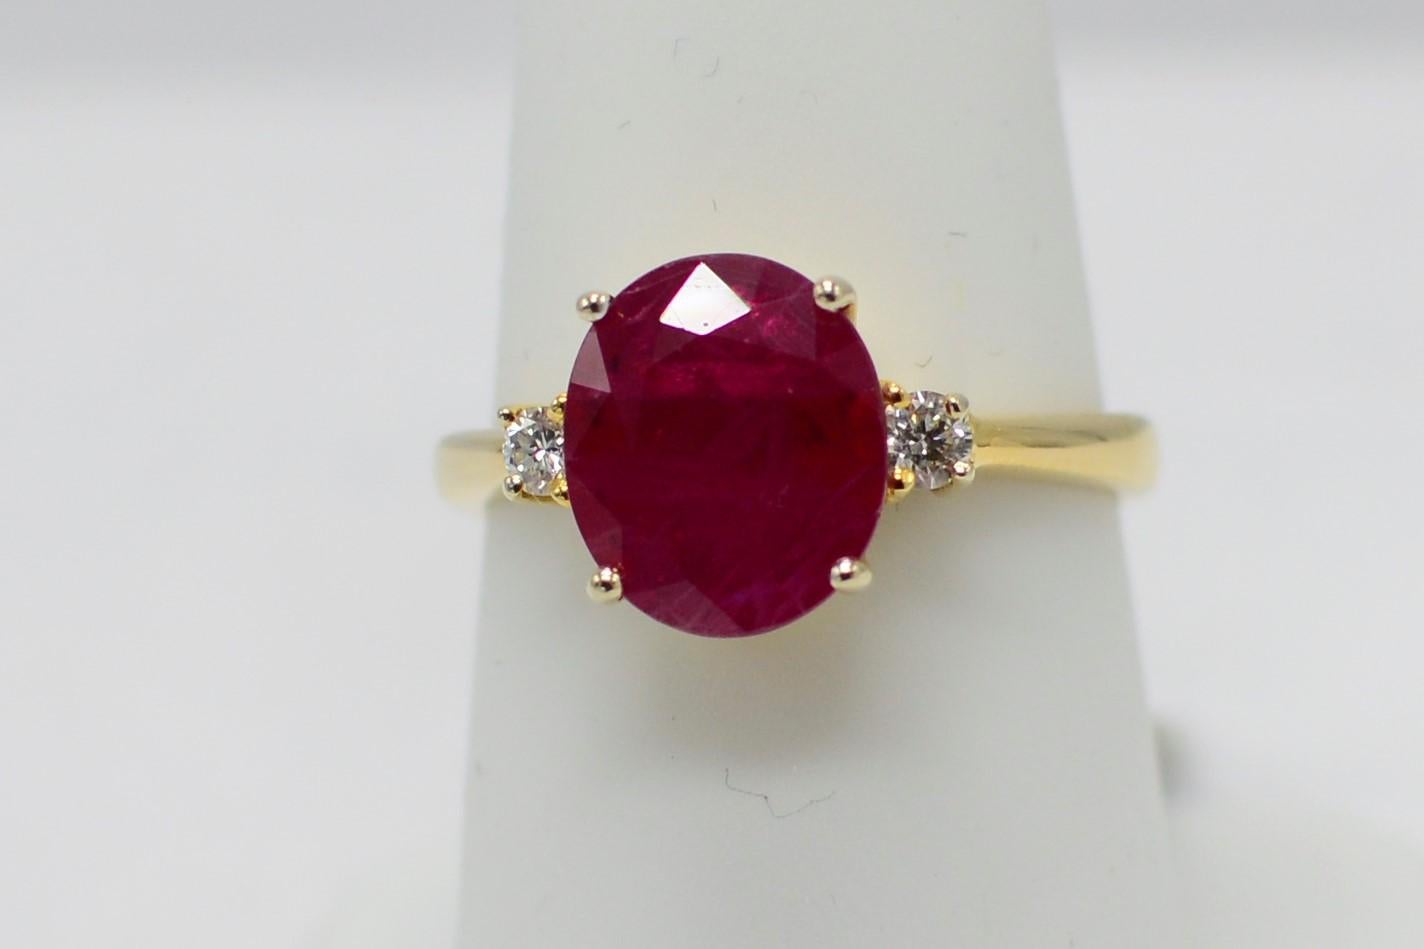 GIA Certified natural Burma 3.0 carat Ruby ring in 18K Yellow Gold, with side two round diamond 0.10 carat. Diamonds are G-H color VVS quality. this Burma Ruby is very deep red in color and with good luster.
oval shape Ruby.
18k yellow gold  3.80